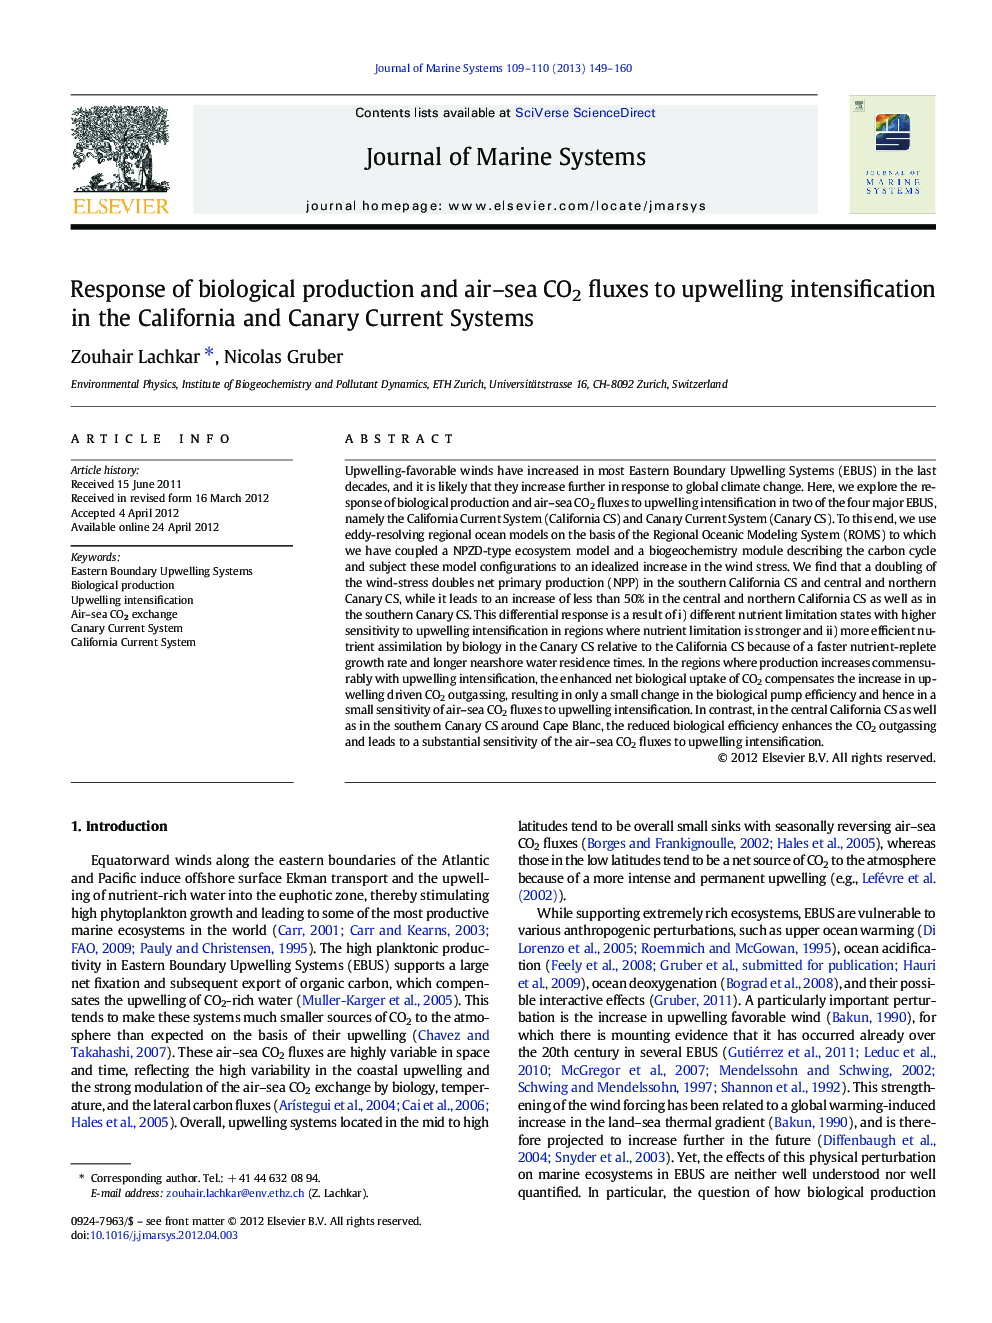 Response of biological production and air–sea CO2 fluxes to upwelling intensification in the California and Canary Current Systems